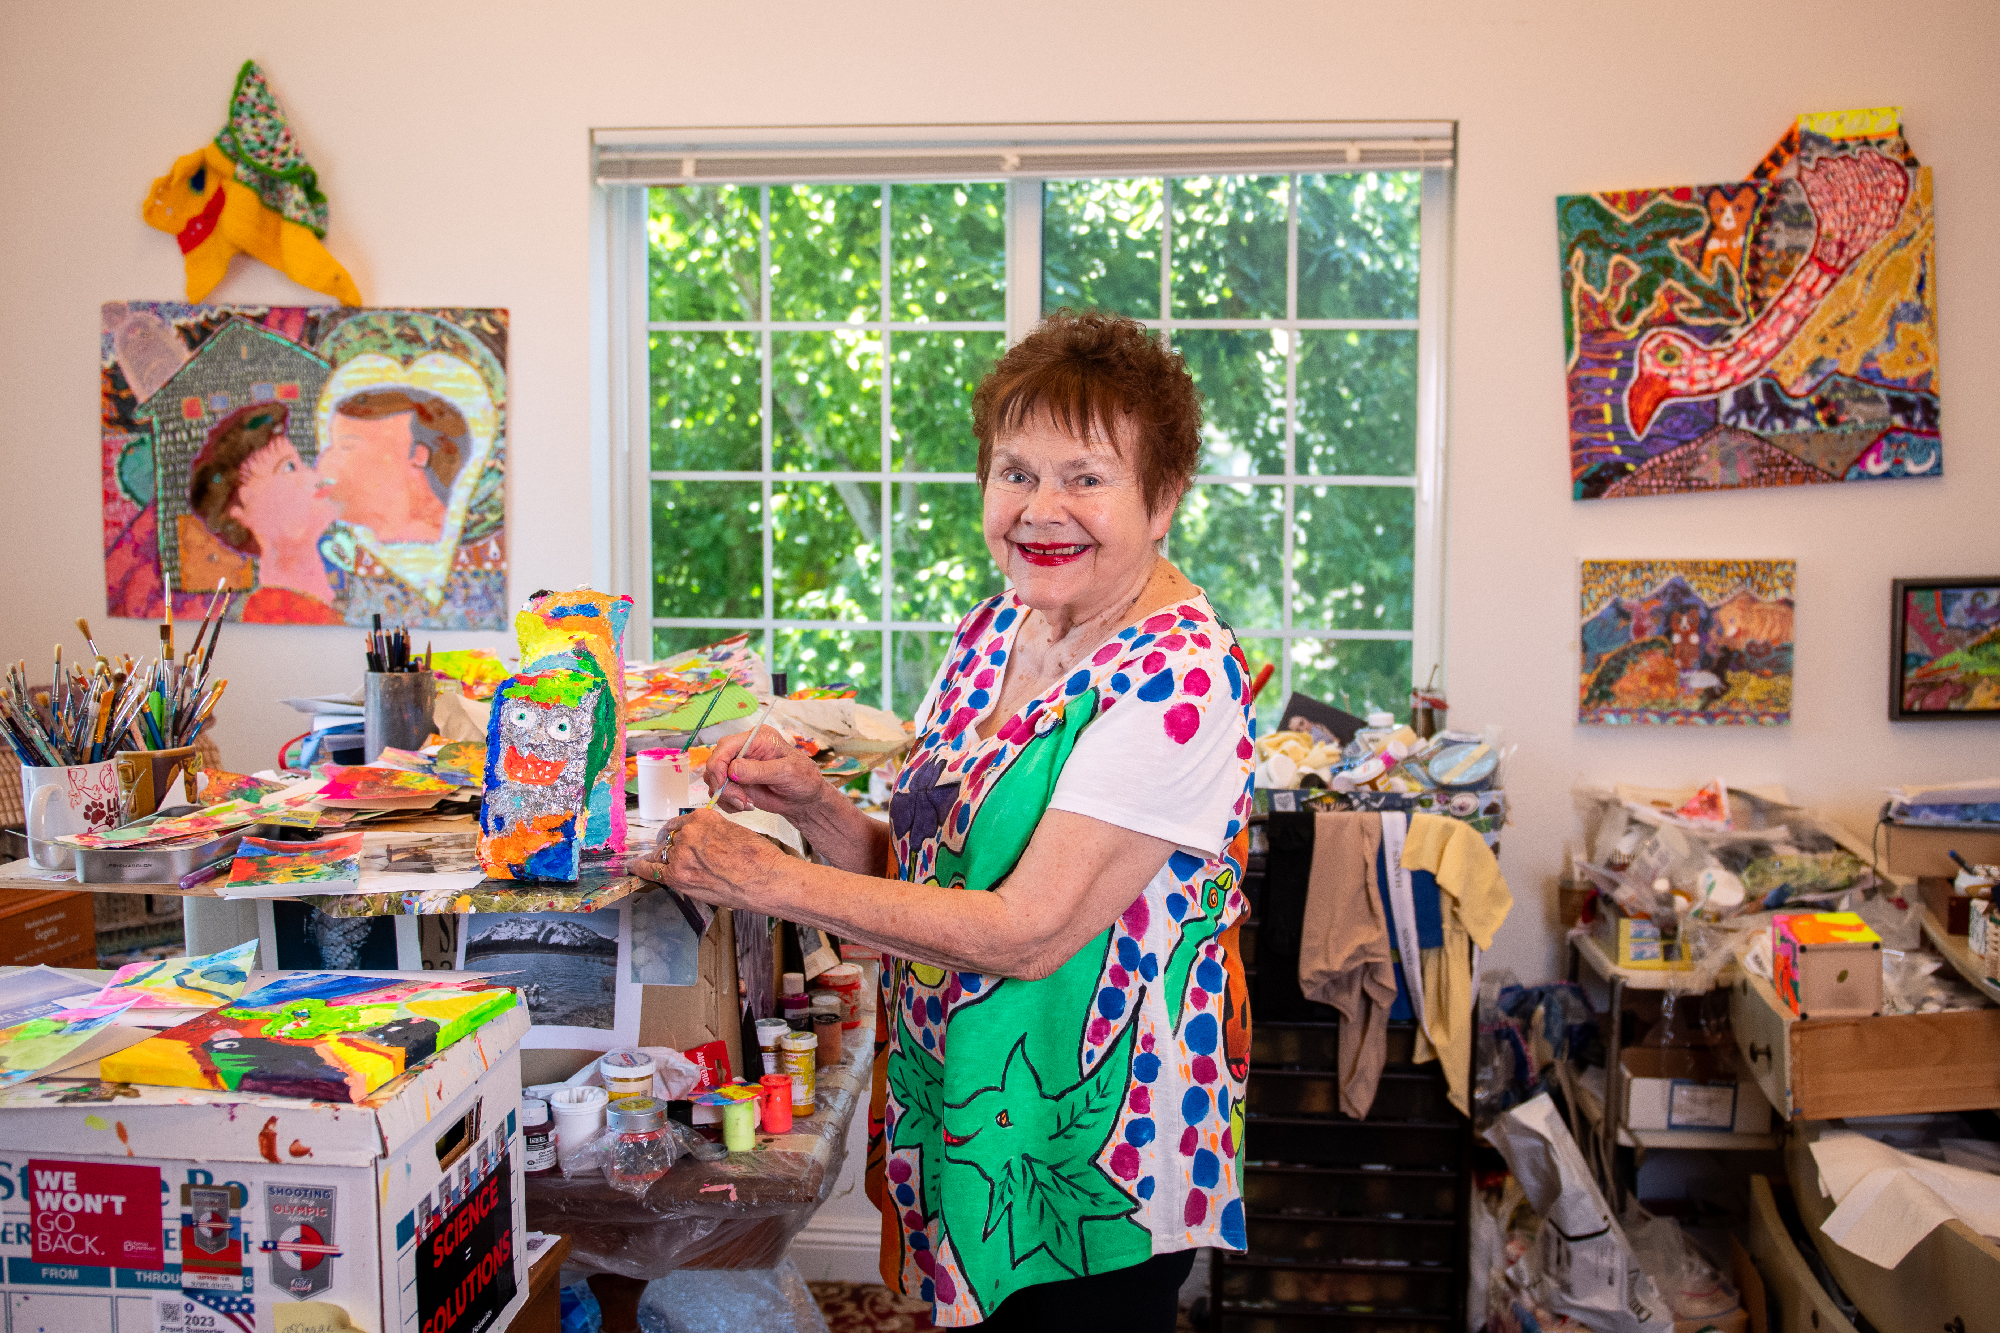 An older woman in a hand-painted shirt smiles while holding a brightly painted sculpture, surrounded by art supplies and artwork